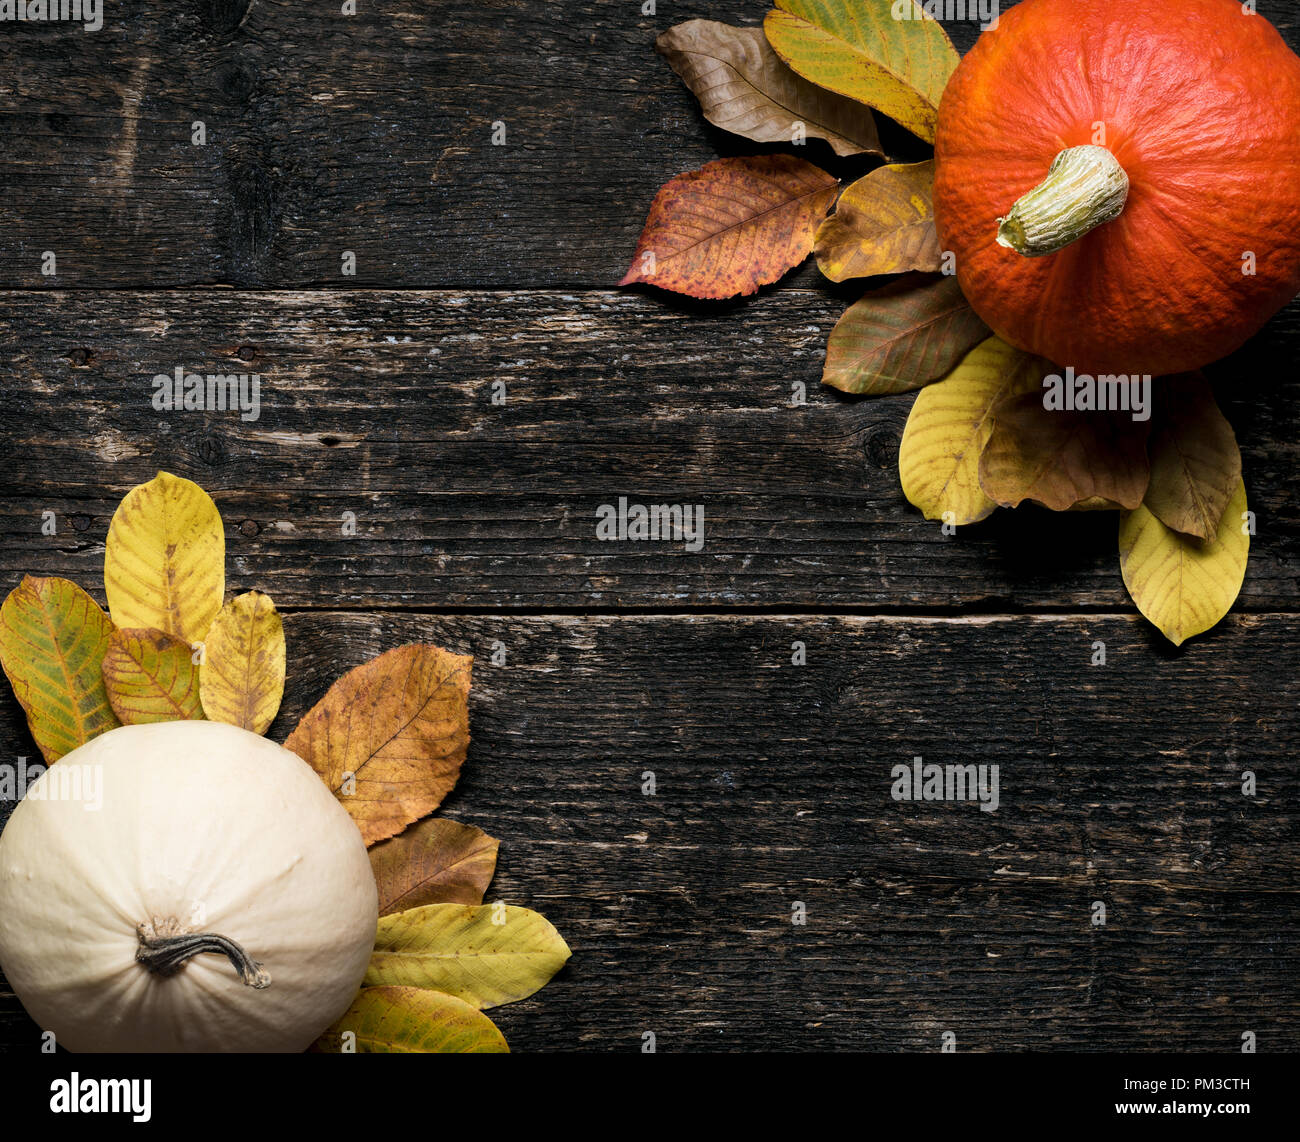 Autumn Harvest and Holiday still life. Happy Thanksgiving Background. Two pumpkins and fallen leaves on dark wooden background. Autumn vegetables and  Stock Photo